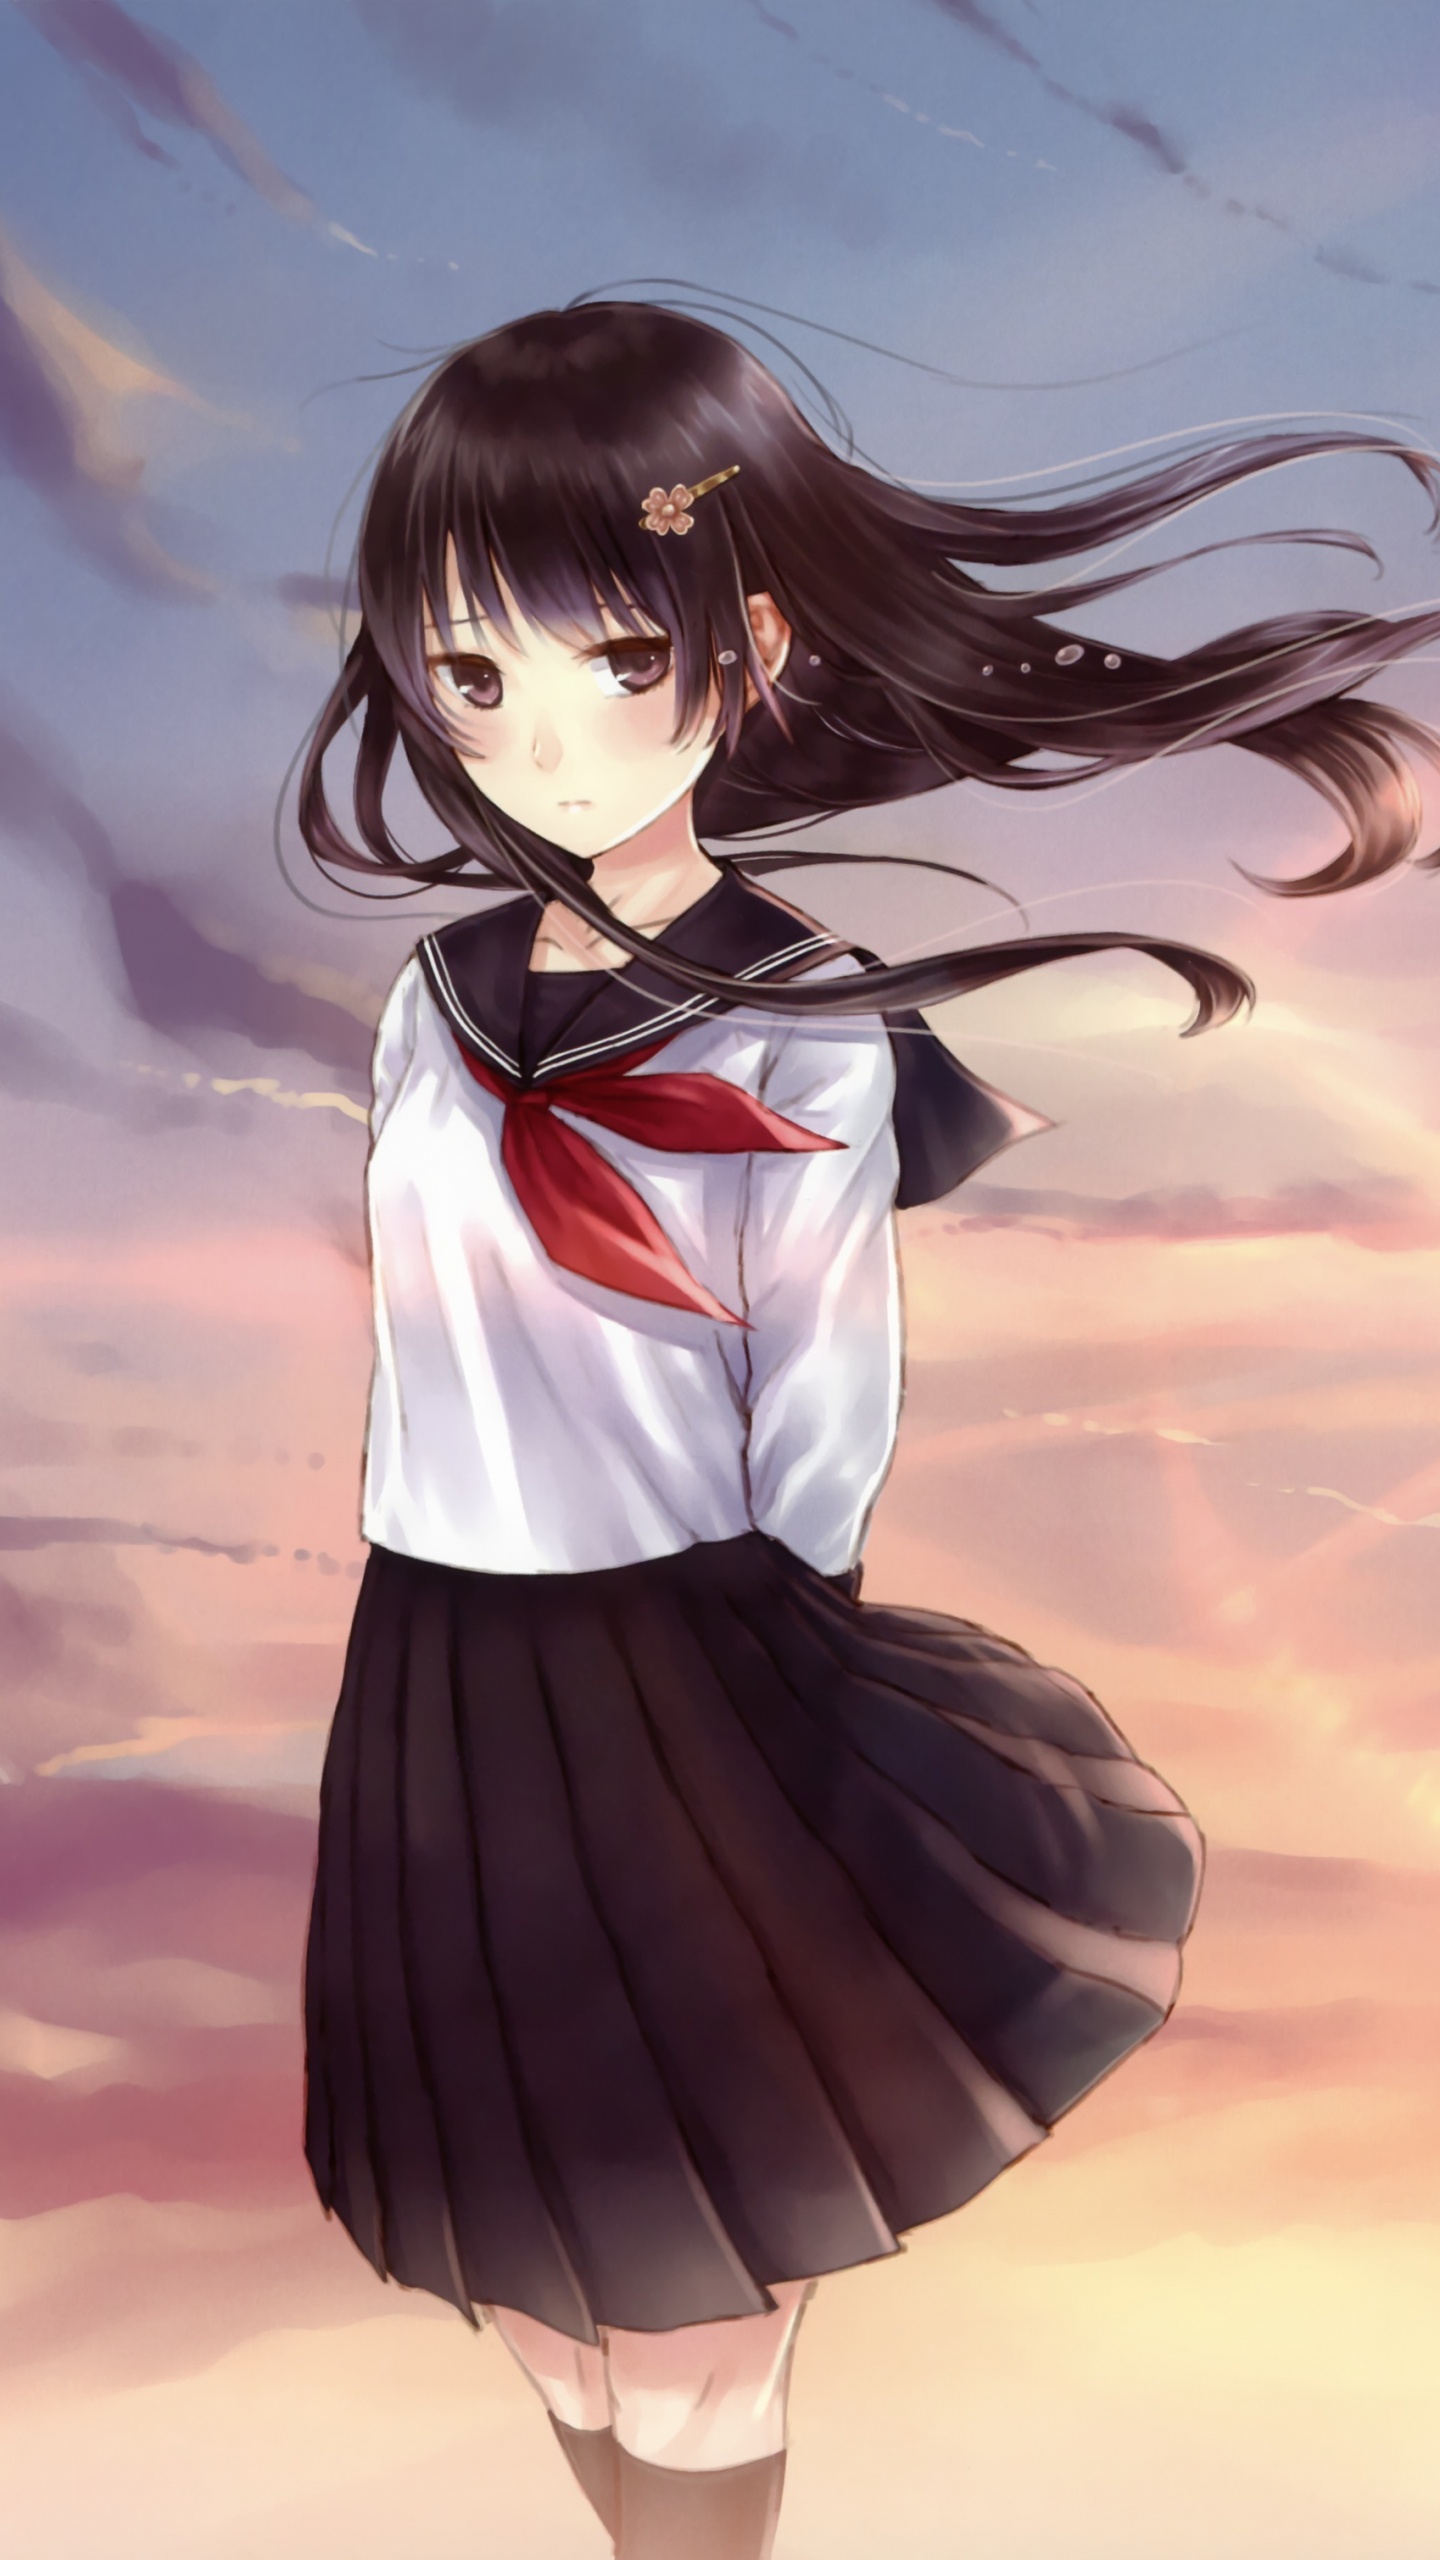 Black Haired Female Anime Character. Wallpaper in 1440x2560 Resolution